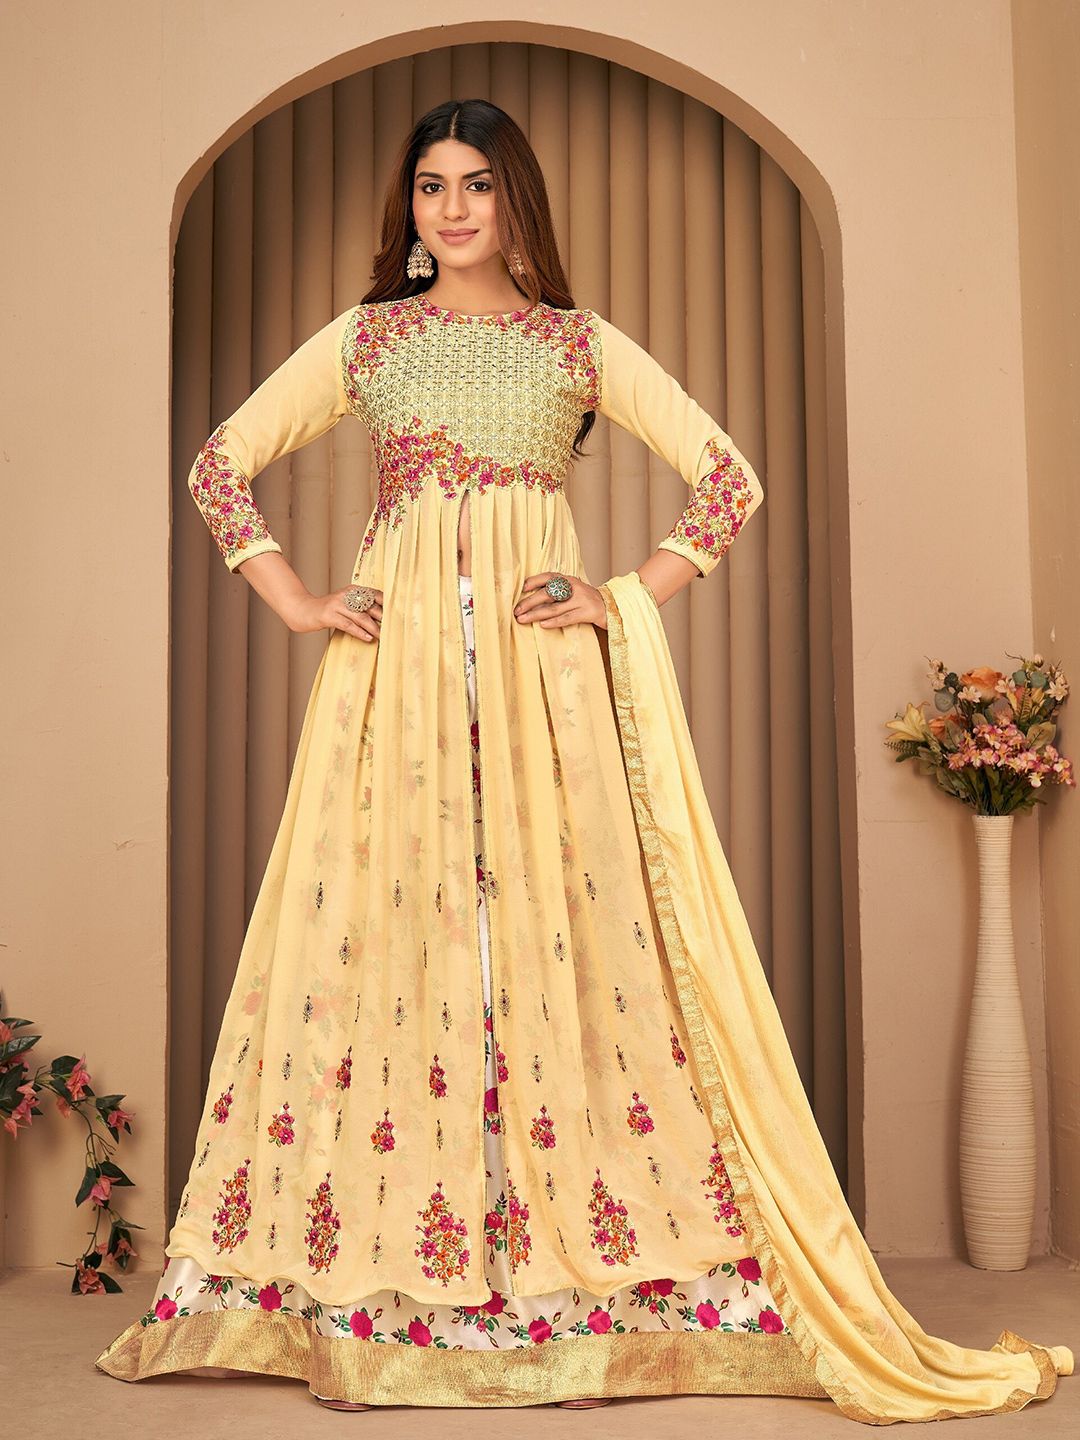 Divine International Trading Co Beige & Red Embroidered Semi-Stitched Dress Material Price in India